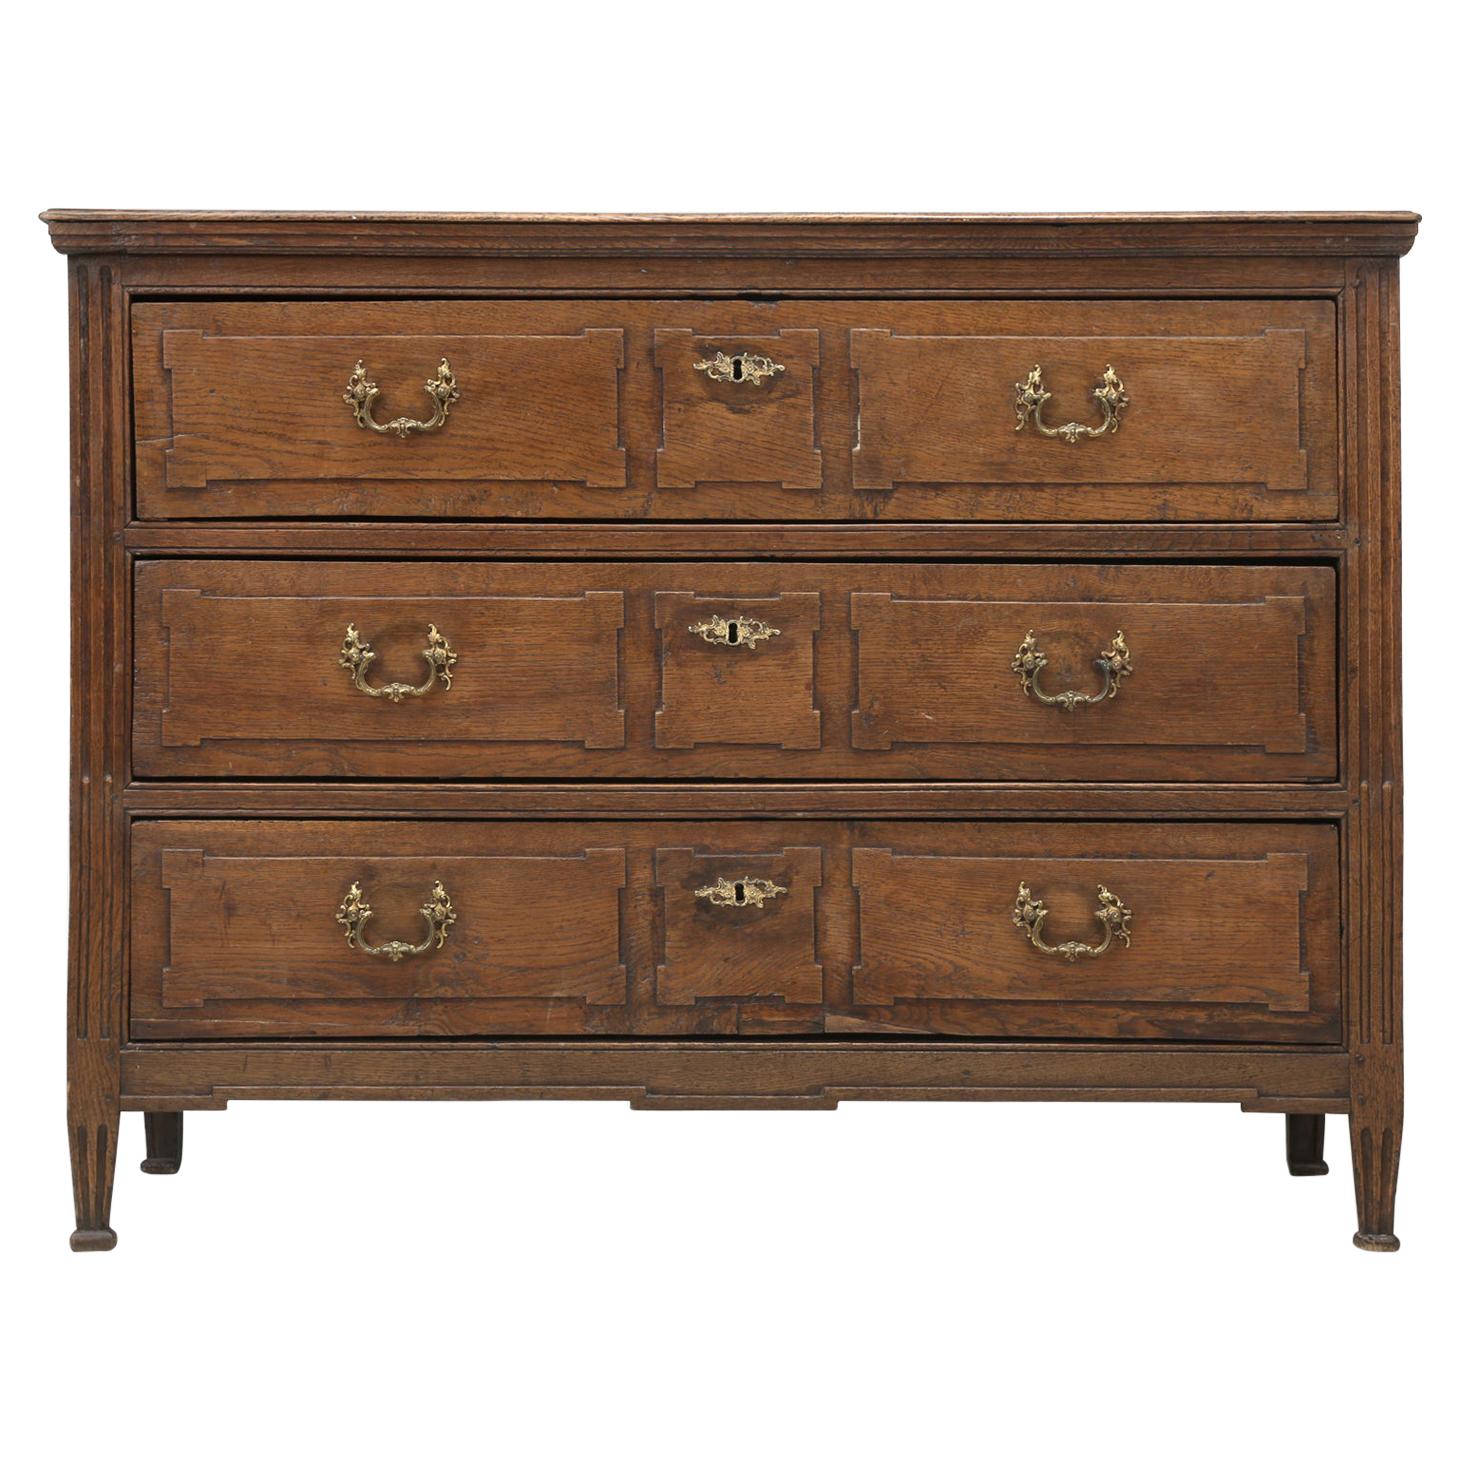 French Oak Commode, Chest of Drawers or Dresser circa 1800s Original Patina